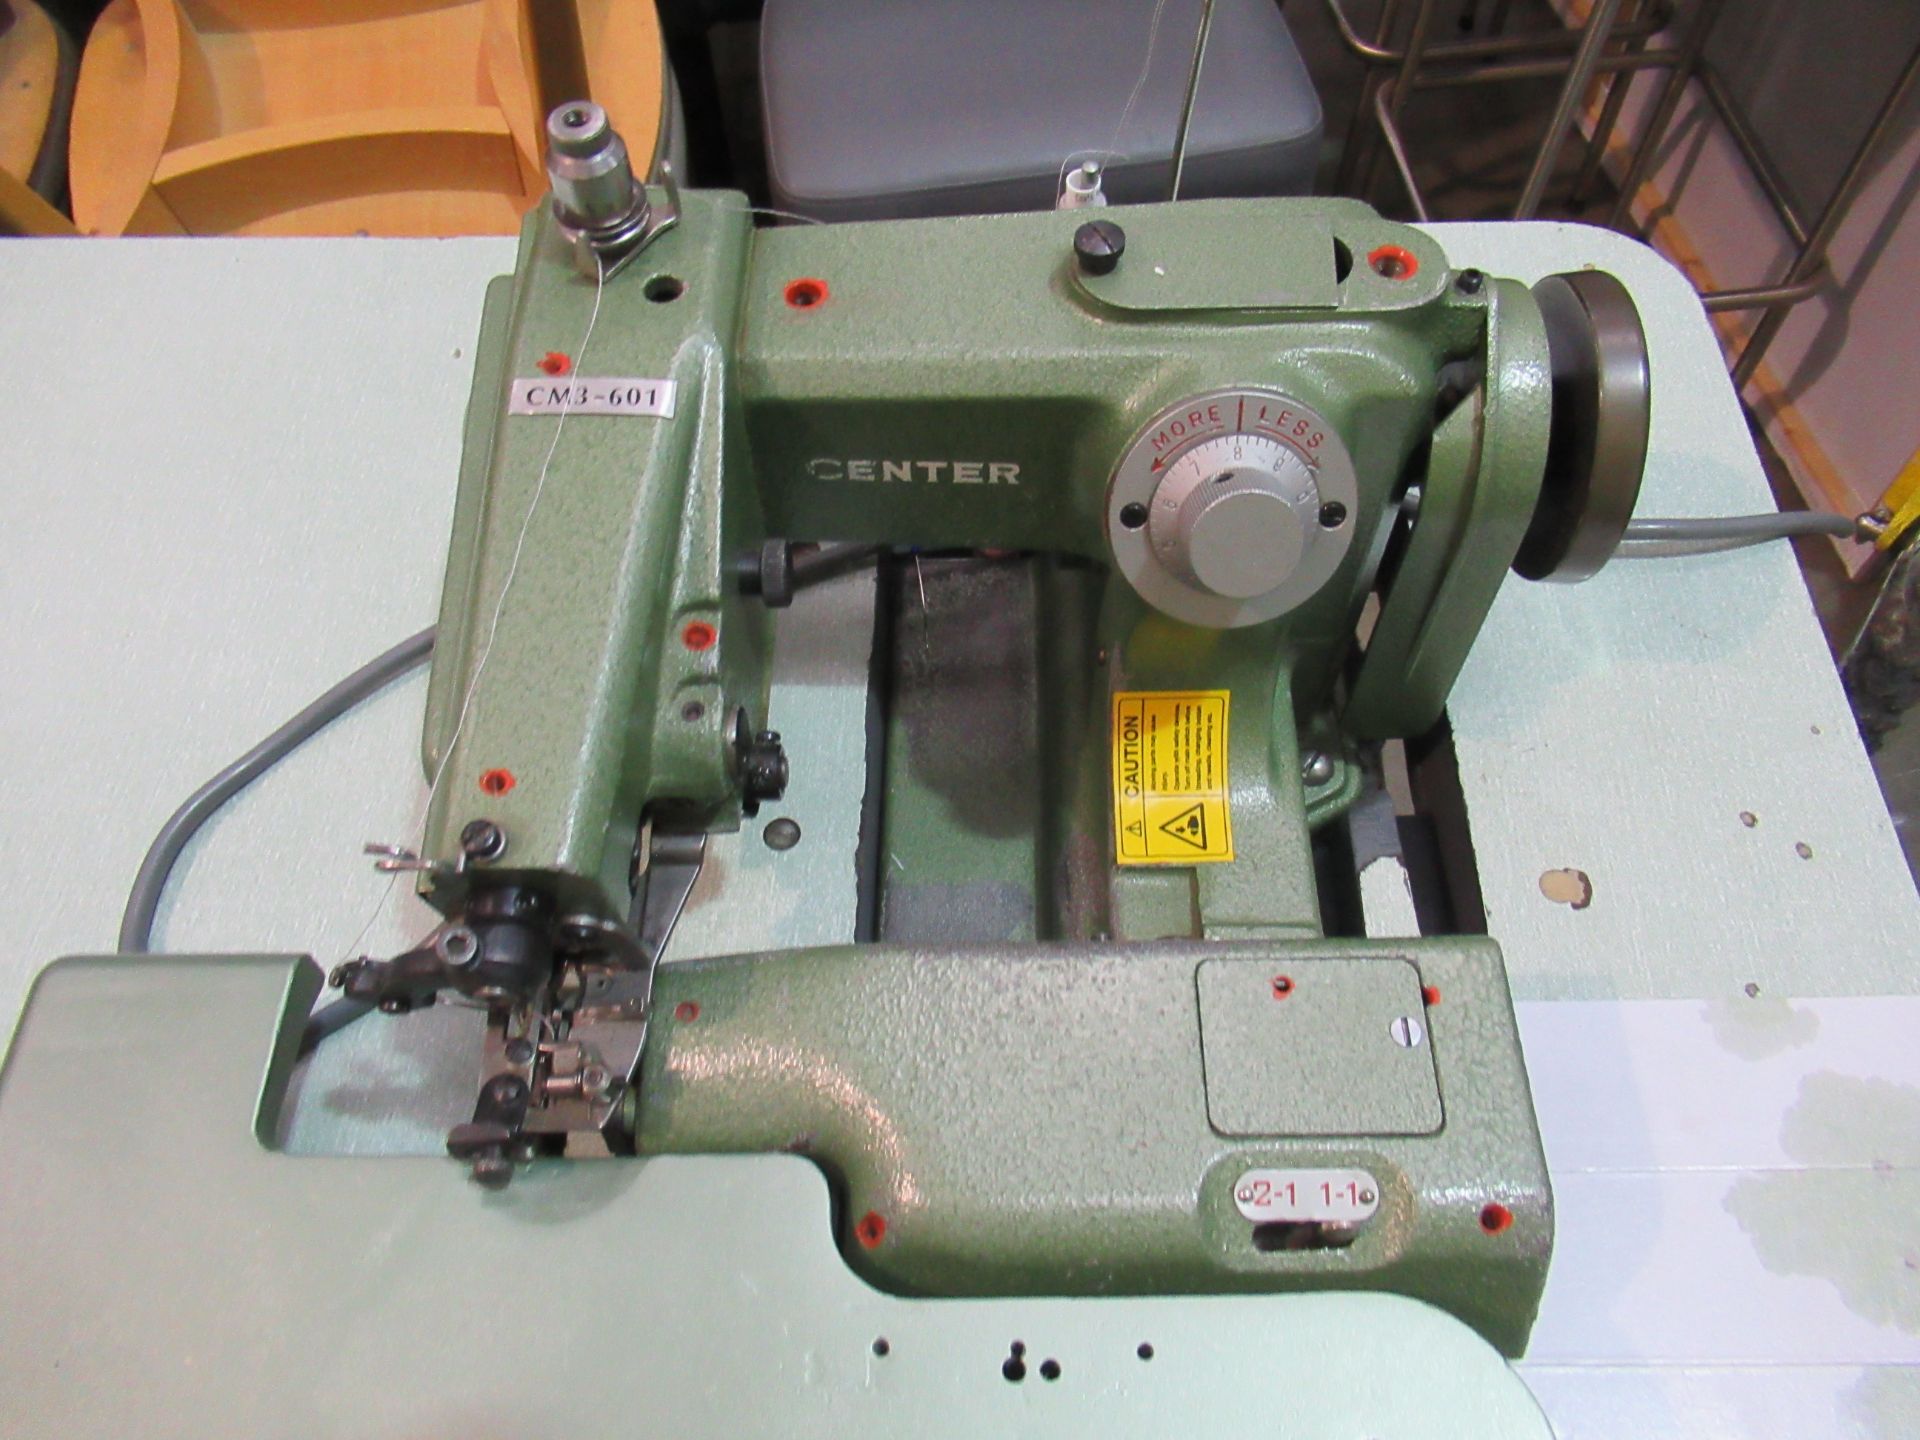 Centre CM3-601 Blind Stitch Sewing Machine Table - Image 3 of 3